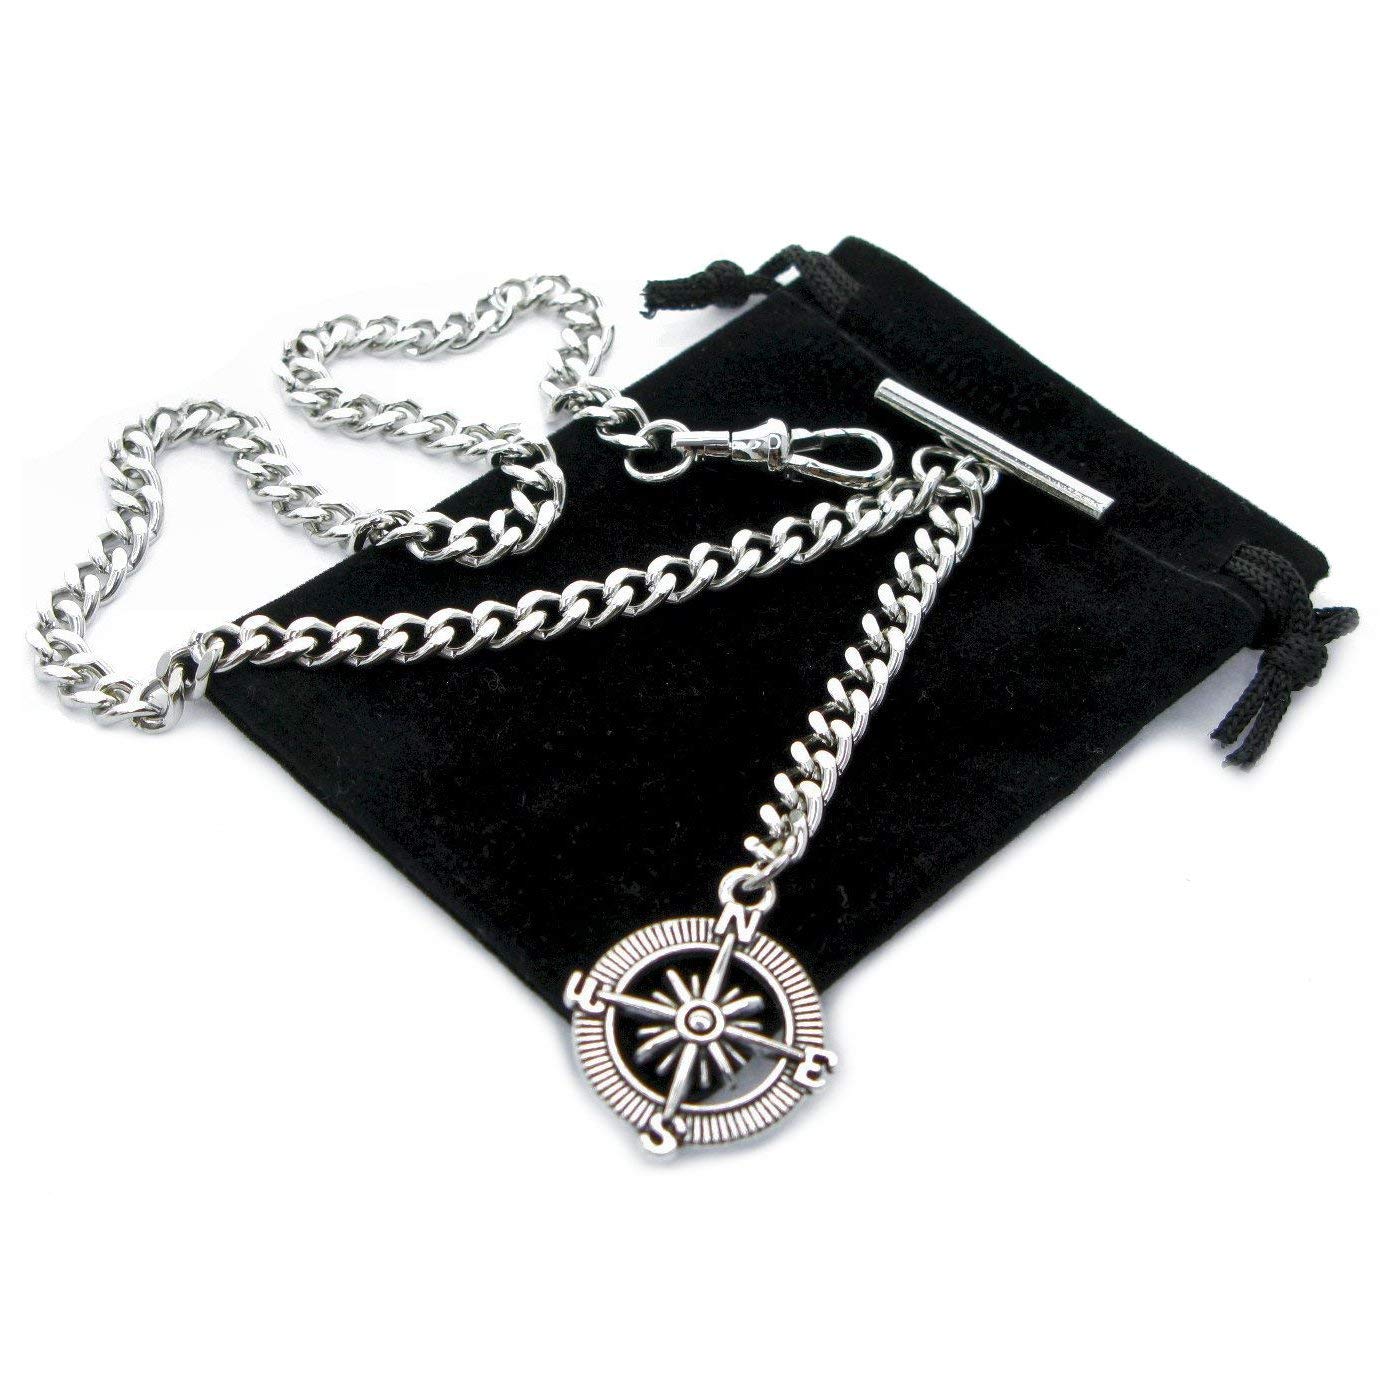 Albert Chain Silver Color Pocket Watch Chains for Men with Compass Design Charm Fob Swivel Claap T Bar AC55